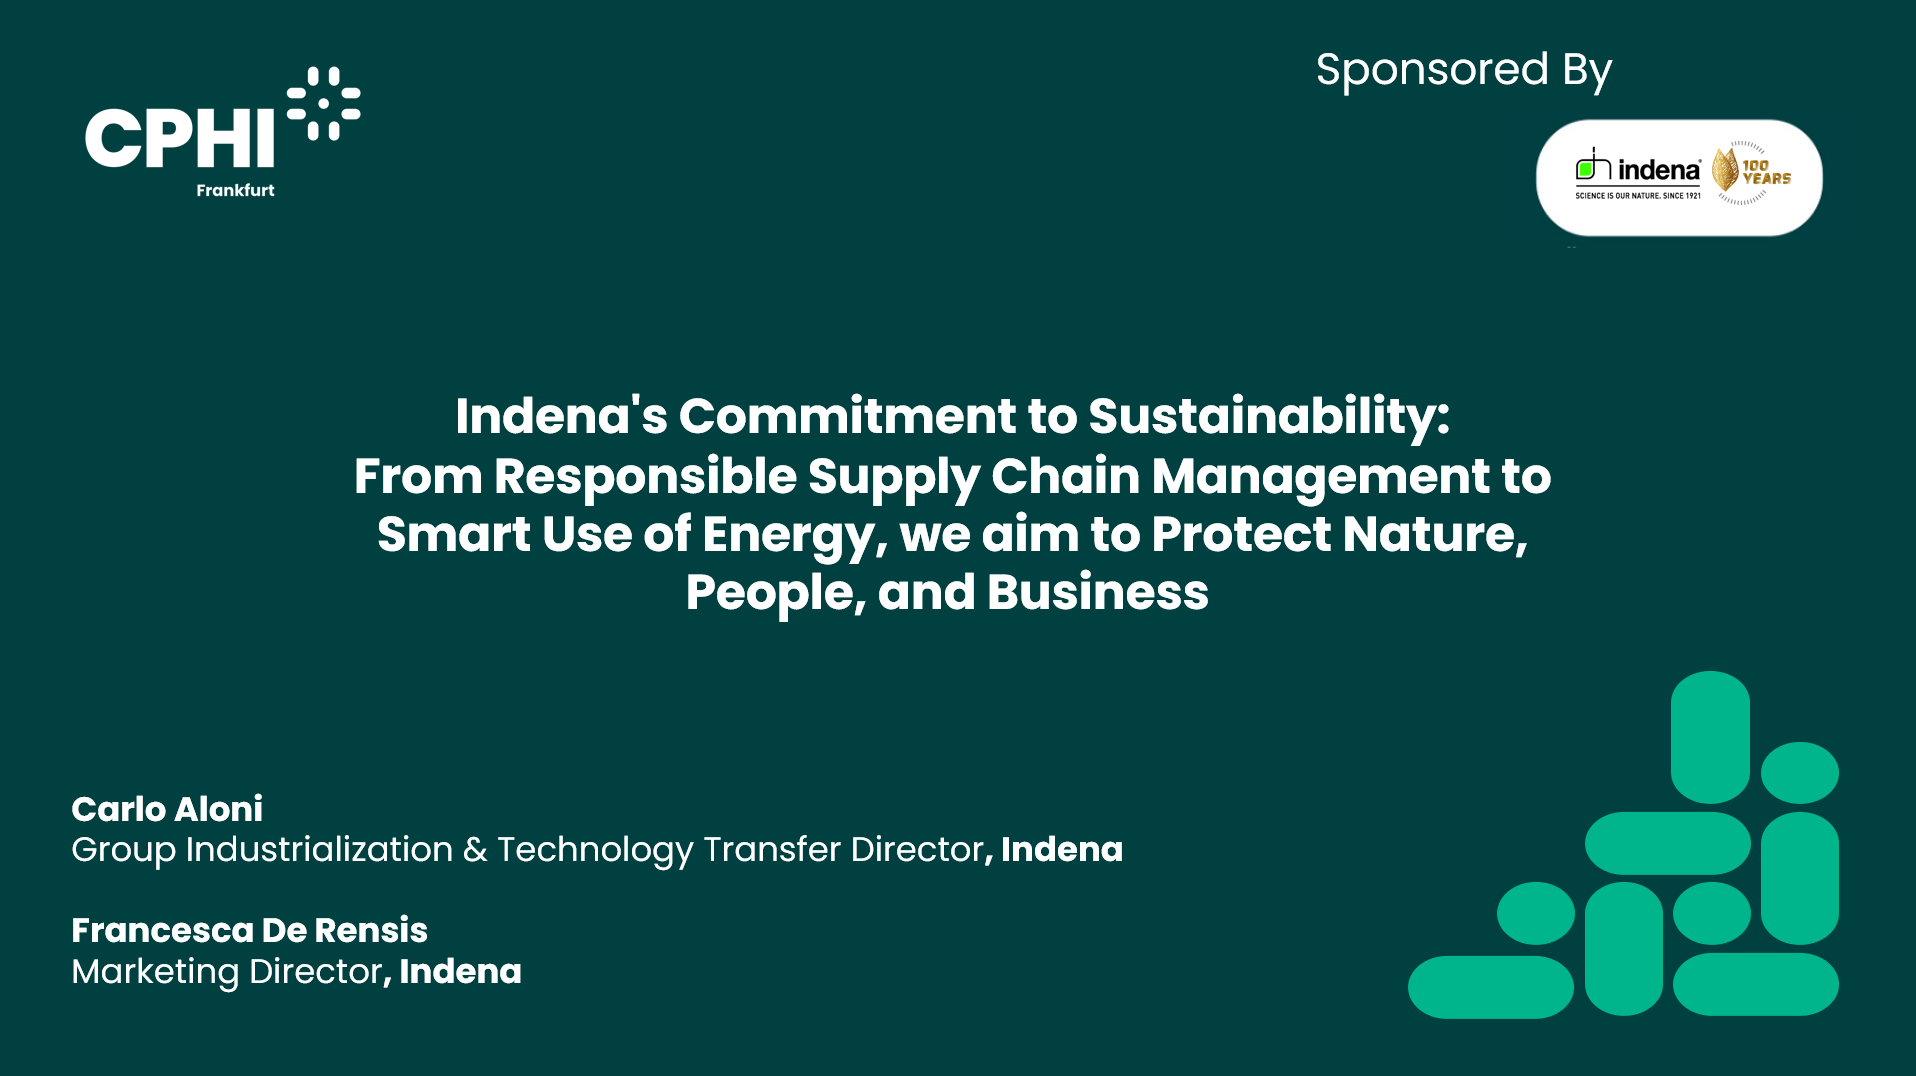 Indena's Commitment to Sustainability: From Responsible Supply Chain Management to Smart Use of Energy, we aim to Protect Nature, People, and Business